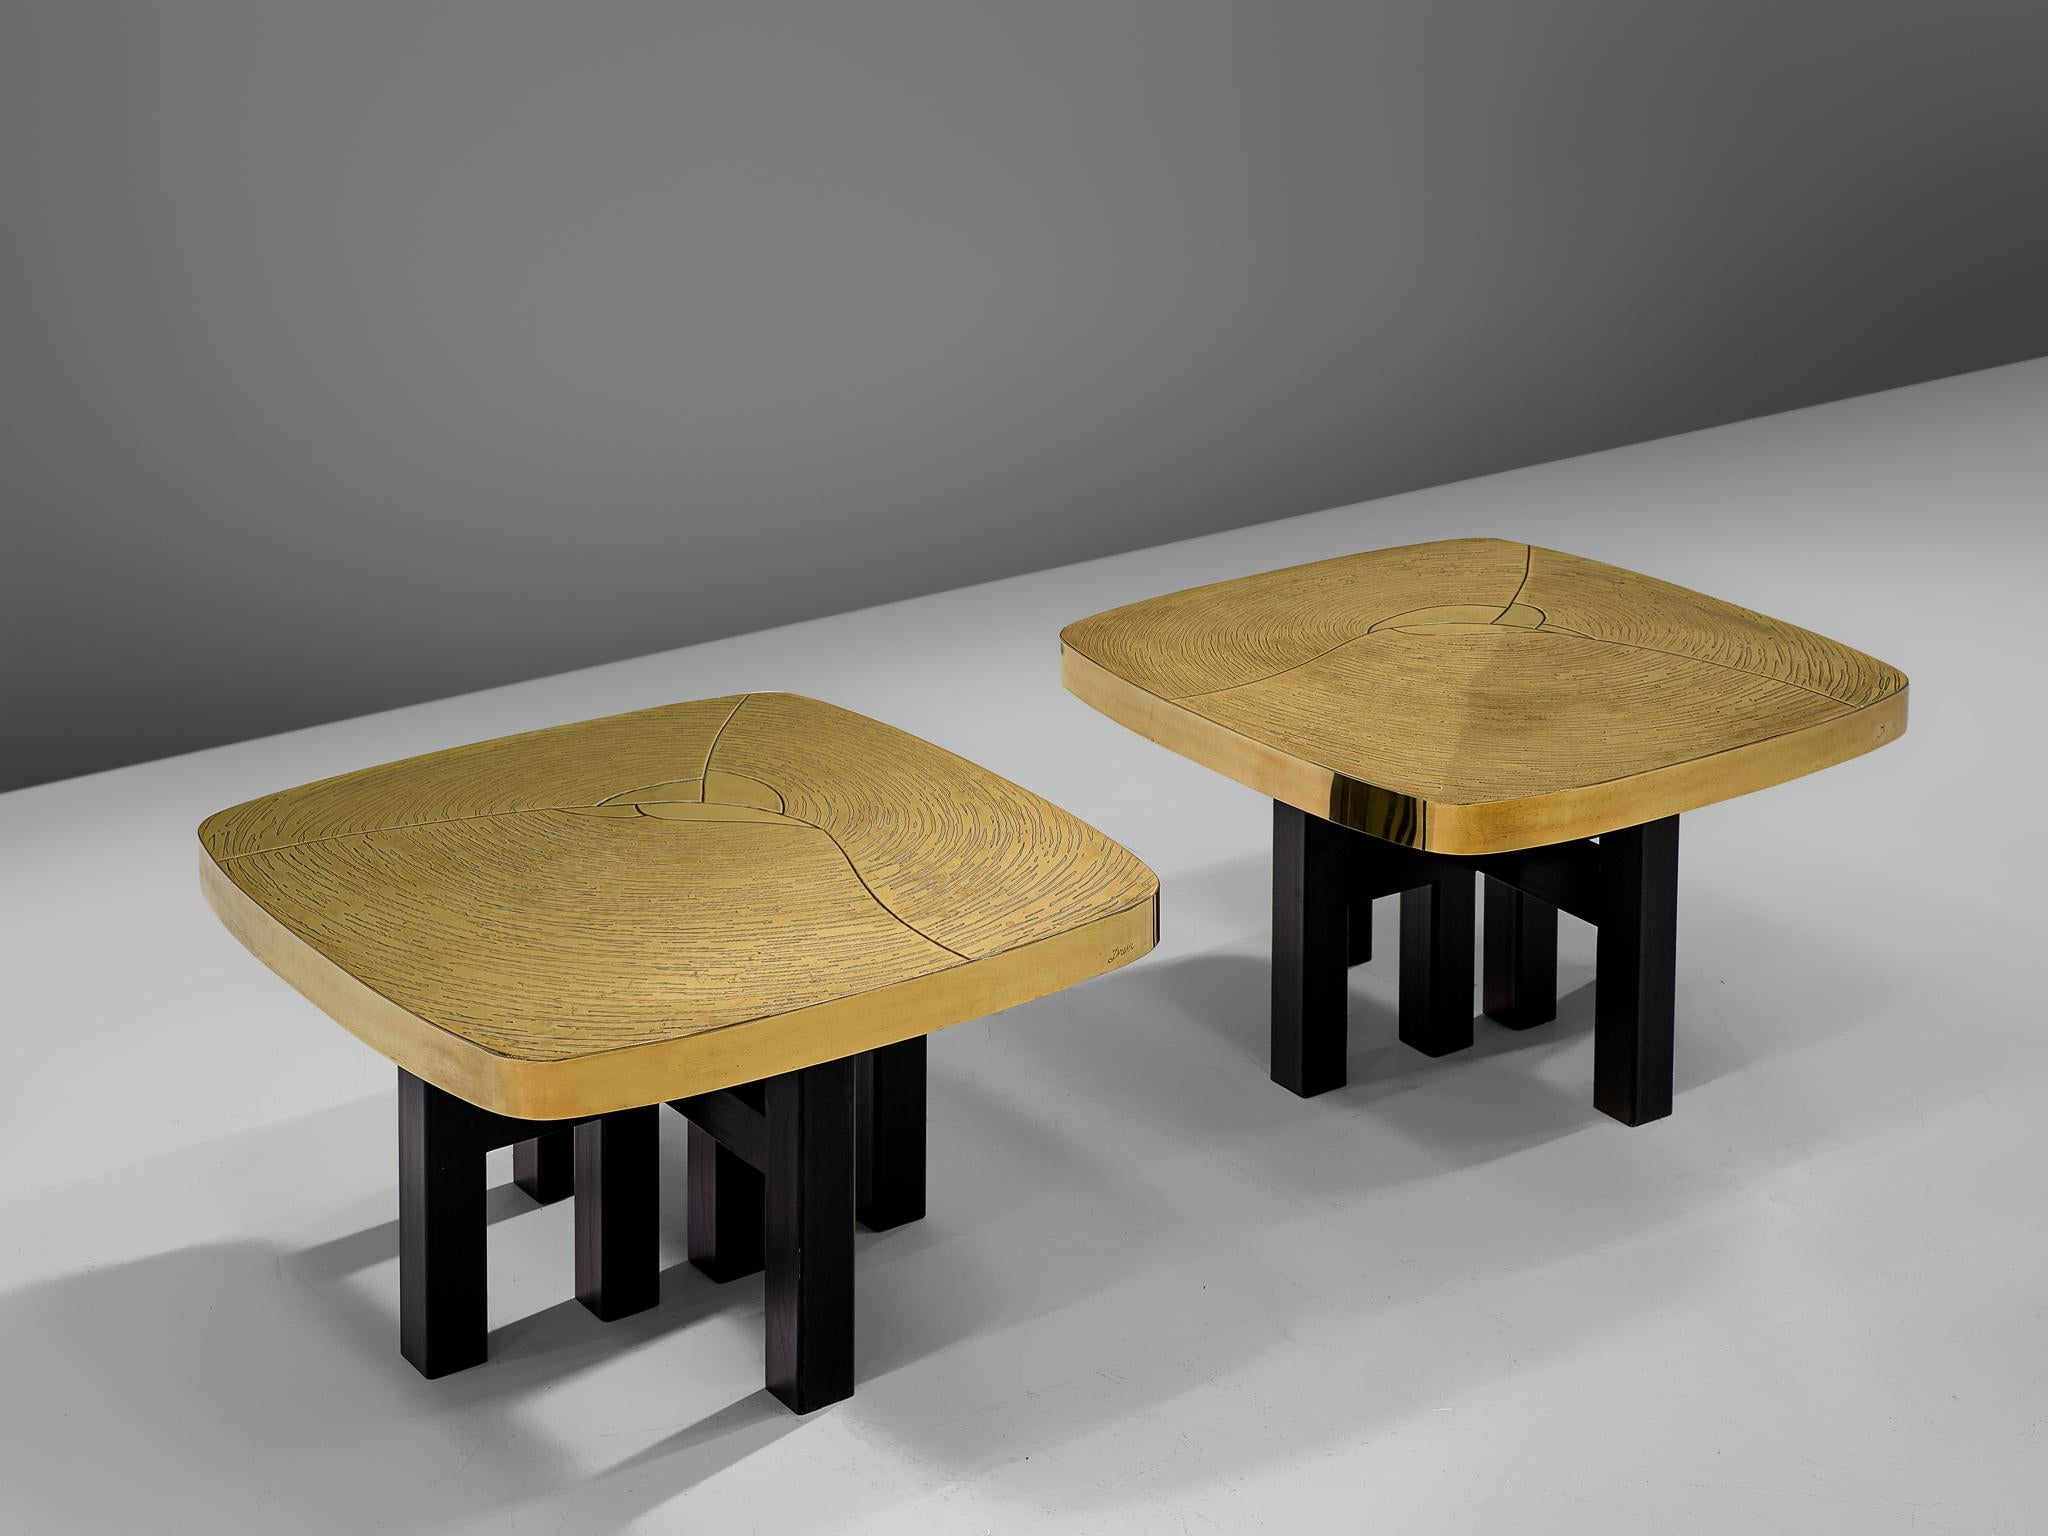 Jean Claude Dresse, pair of side tables, brass and steel, Belgium, circa 1976

A luxurious pair of squared side tables, crafted with high attention for detail which is characteristic for the work of the Belgian artist Jean Claude Dresse. This pair